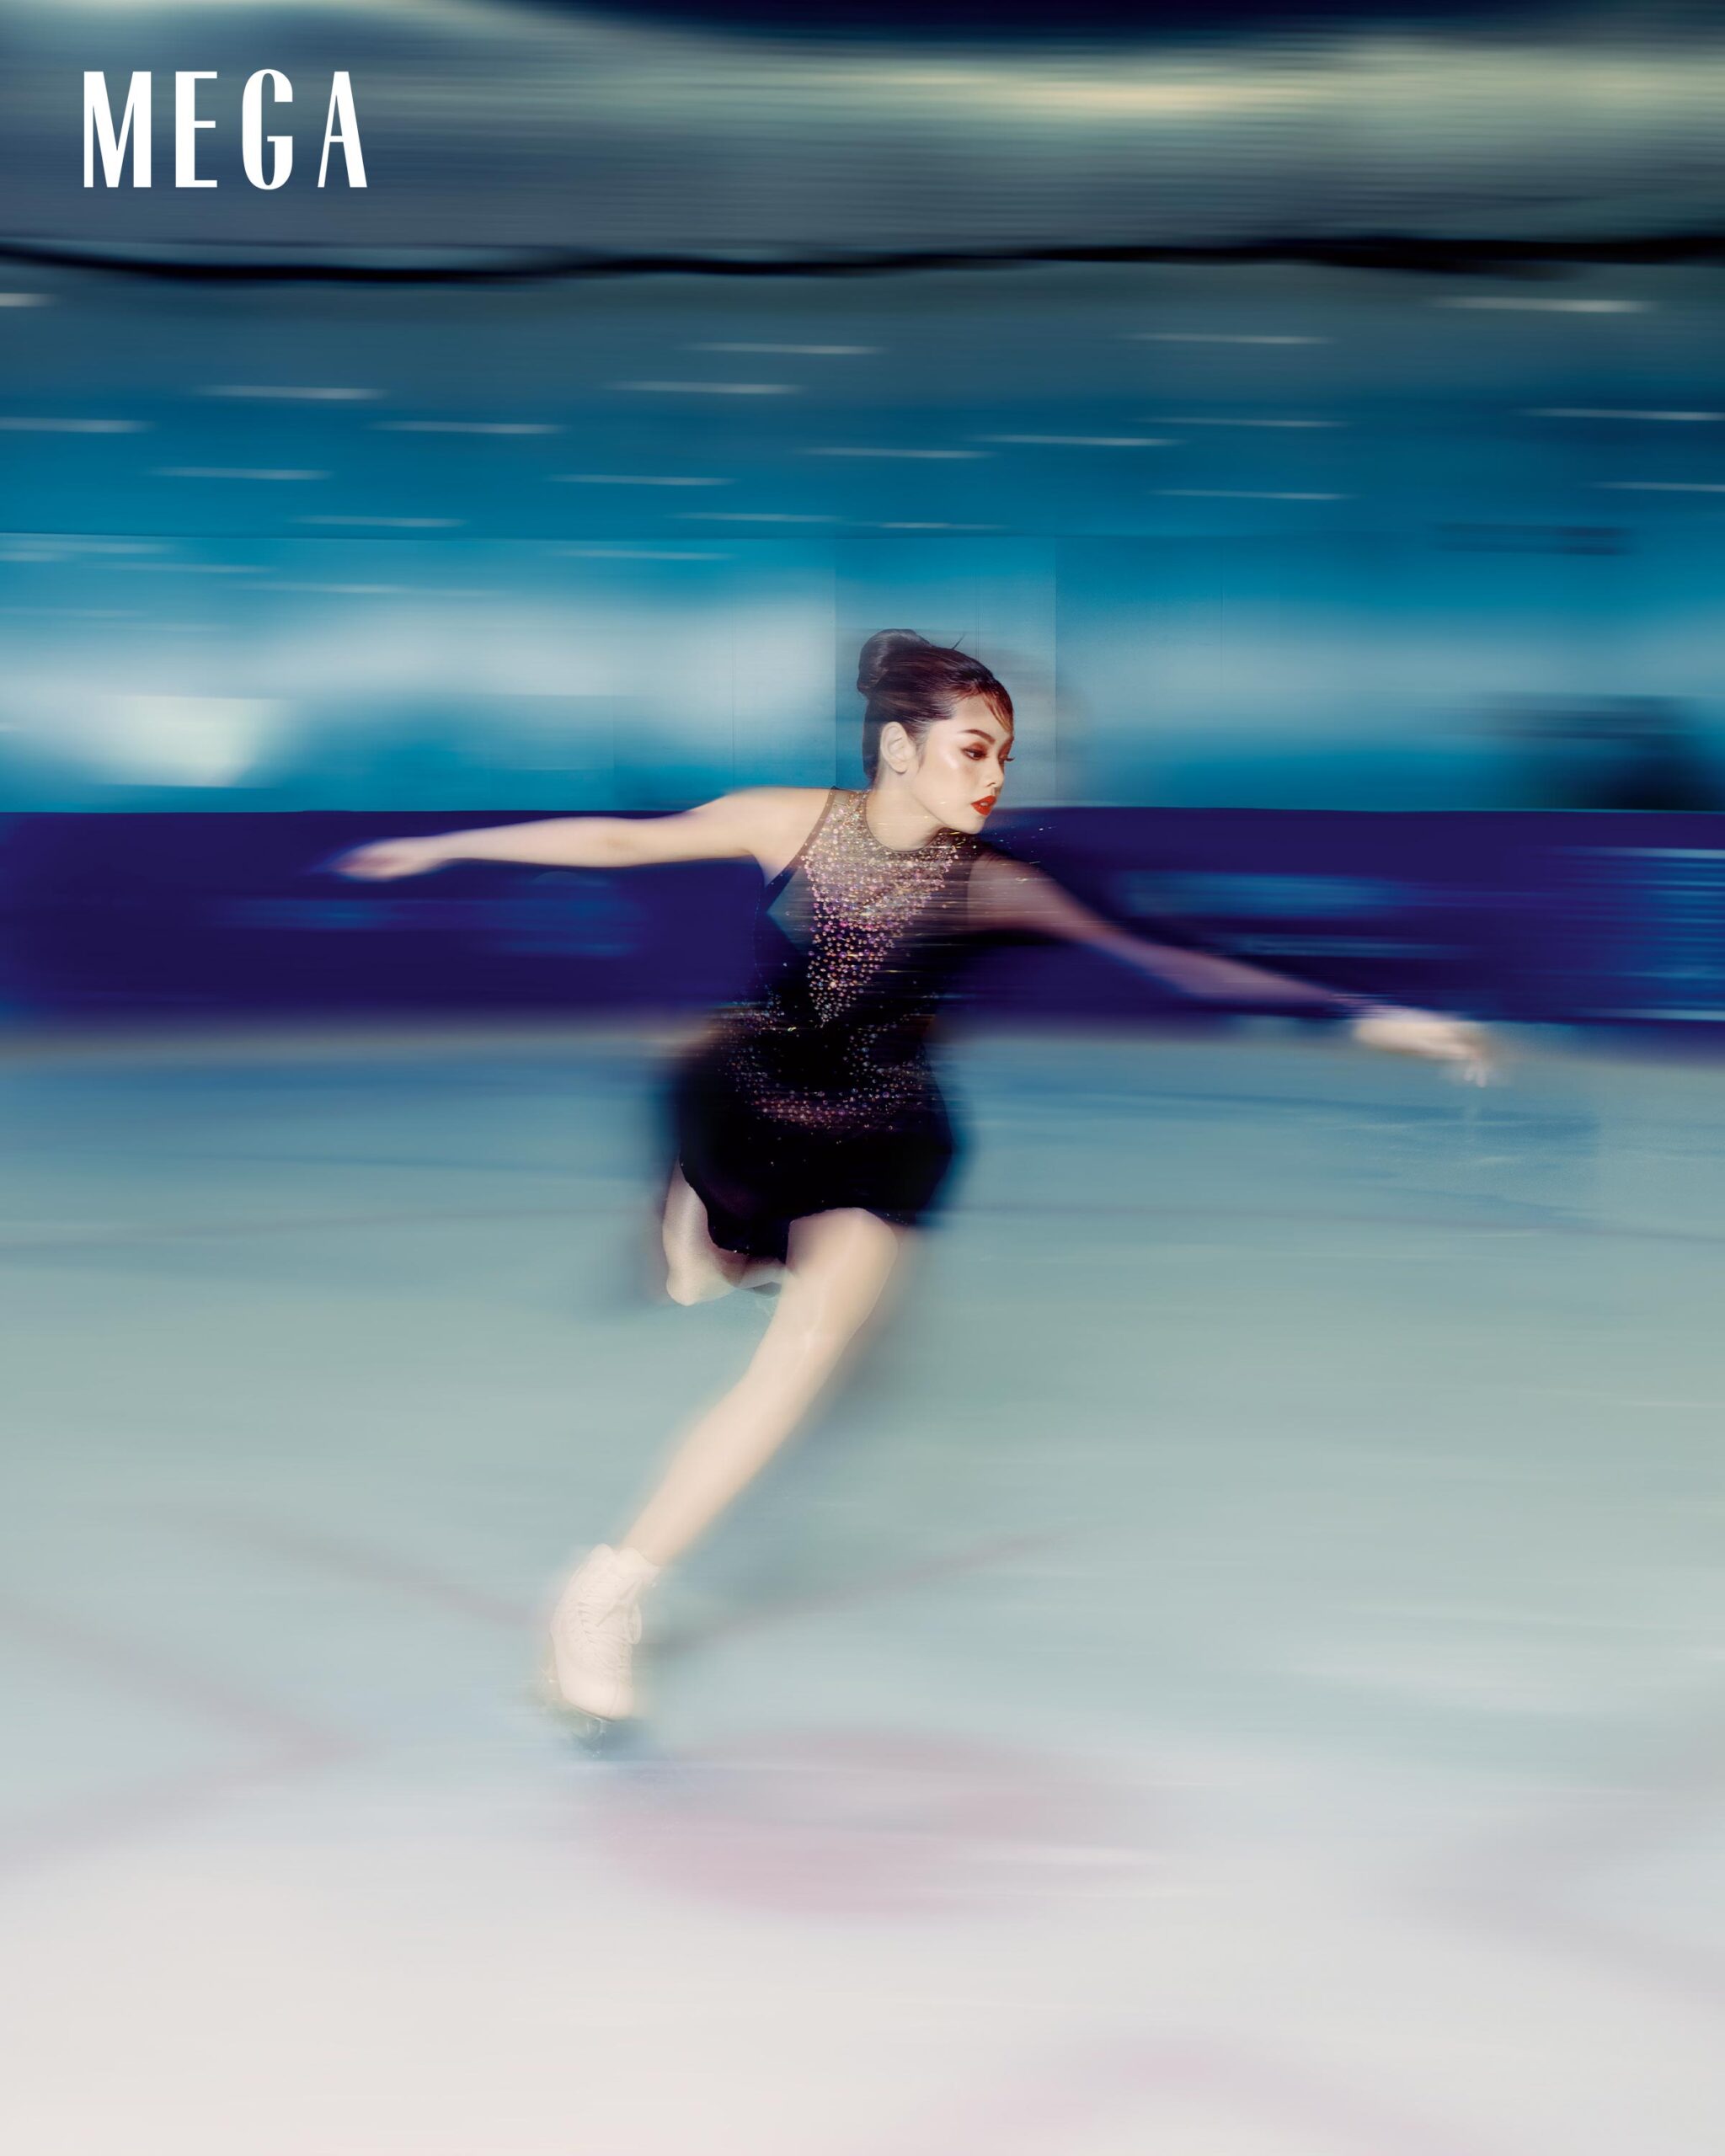 Skye Chua continues to stand at the precipice of her dreams, poised to leap into the future with the same grace that defines her on the ice.